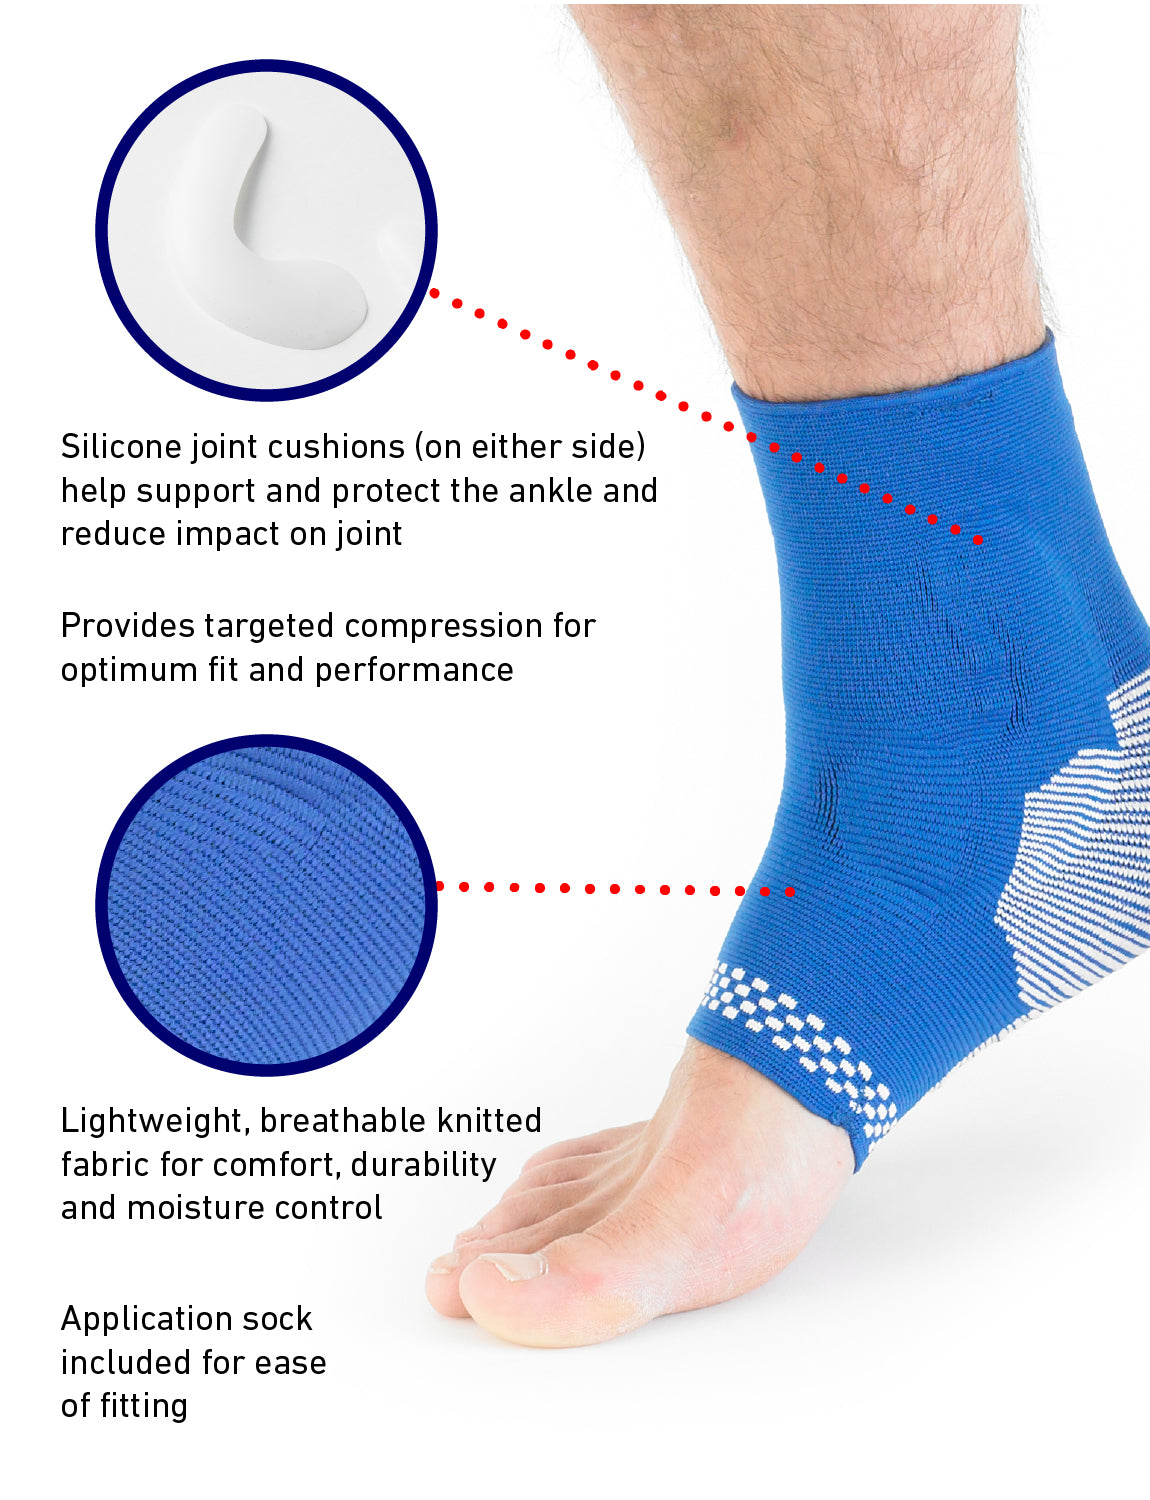 Neo G Airflow Plus Ankle Support with Silicone Joint Cushions – Neo G USA